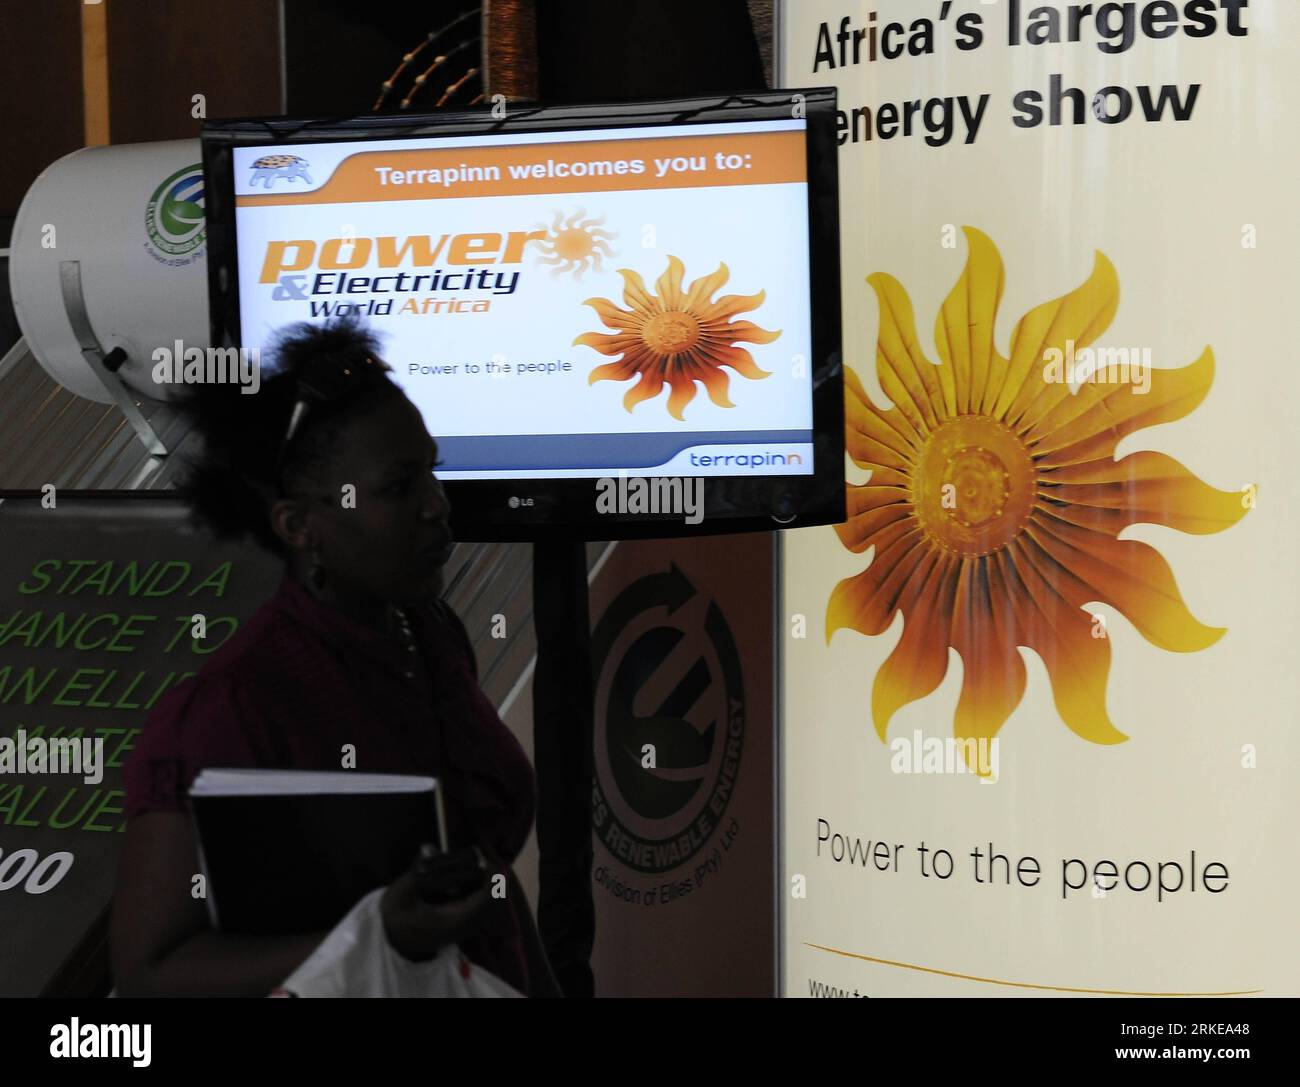 Bildnummer: 55155974  Datum: 30.03.2011  Copyright: imago/Xinhua (110330) -- PRETORIA, March 30, 2011 (Xinhua) -- A visitor passes by a poster during the Power and Electricity World Africa 2011 in Johannesburg, South Africa, March 30, 2011. The two-day Power and Electricity World Africa 2011 attracted more than 250 worldwide power companies to show their products here. (Xinhua/Li Qihua) SOUTH AFRICA-PRETORIA-POWER ELECTRICITY-EXHIBITION PUBLICATIONxNOTxINxCHN Wirtschaft Messe Strom Ausstellung kbdig xcb xo0x 2011 quer     Bildnummer 55155974 Date 30 03 2011 Copyright Imago XINHUA  Pretoria Mar Stock Photo